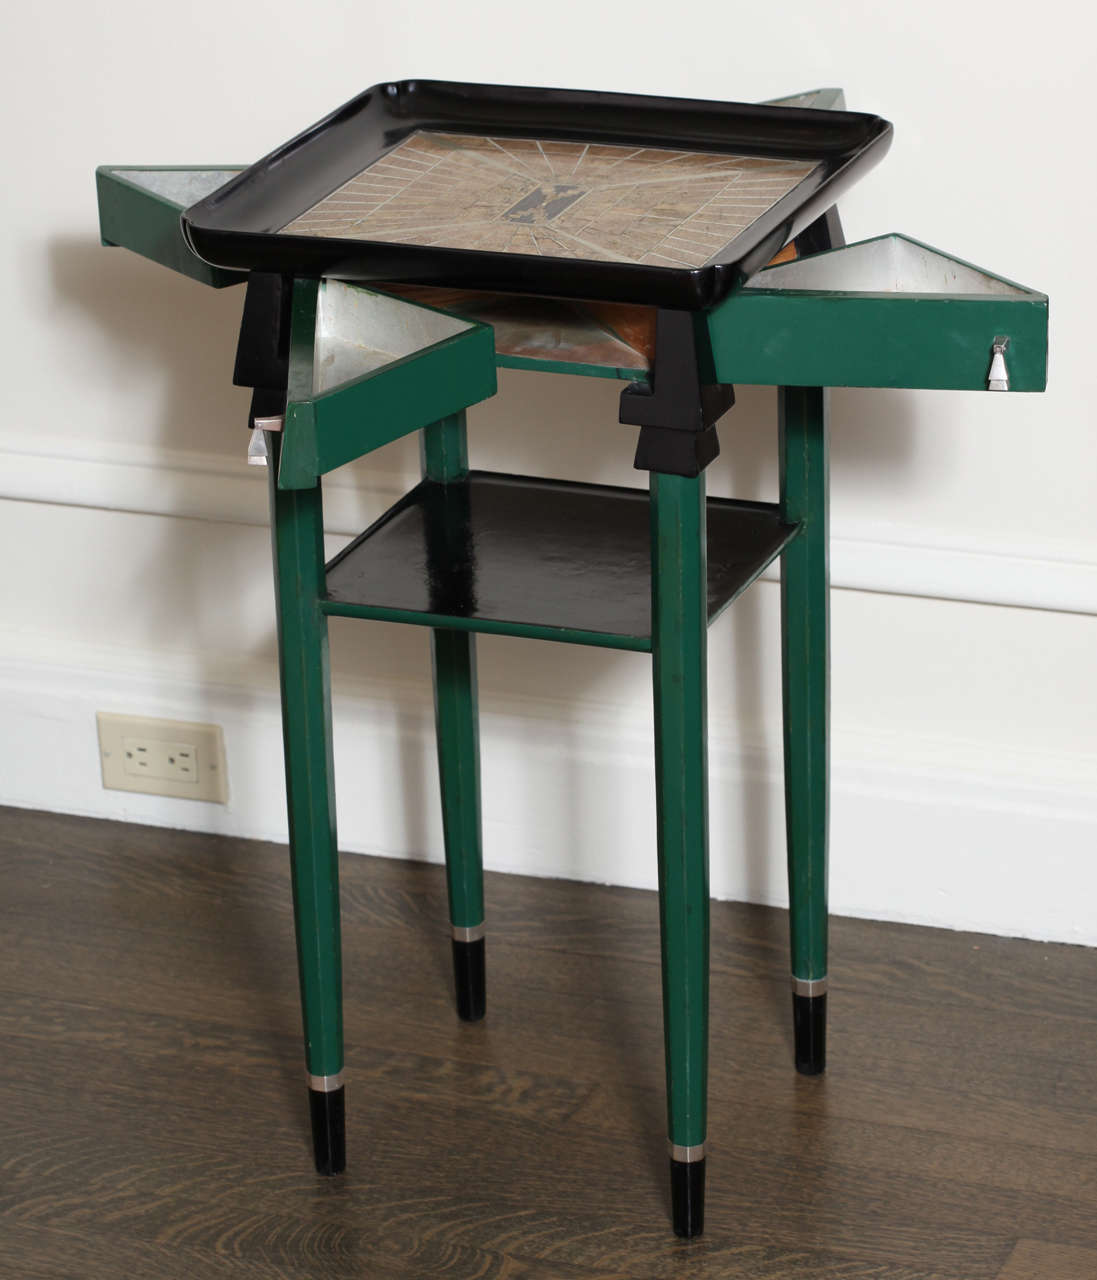 Exquisite and unusual green and black lacquered side table has top inlaid with shagreen, ivory and metal in geometric design. The tabletop has four cornered dimples and is slightly concave. There is a pull out hinged triangular drawer with silver